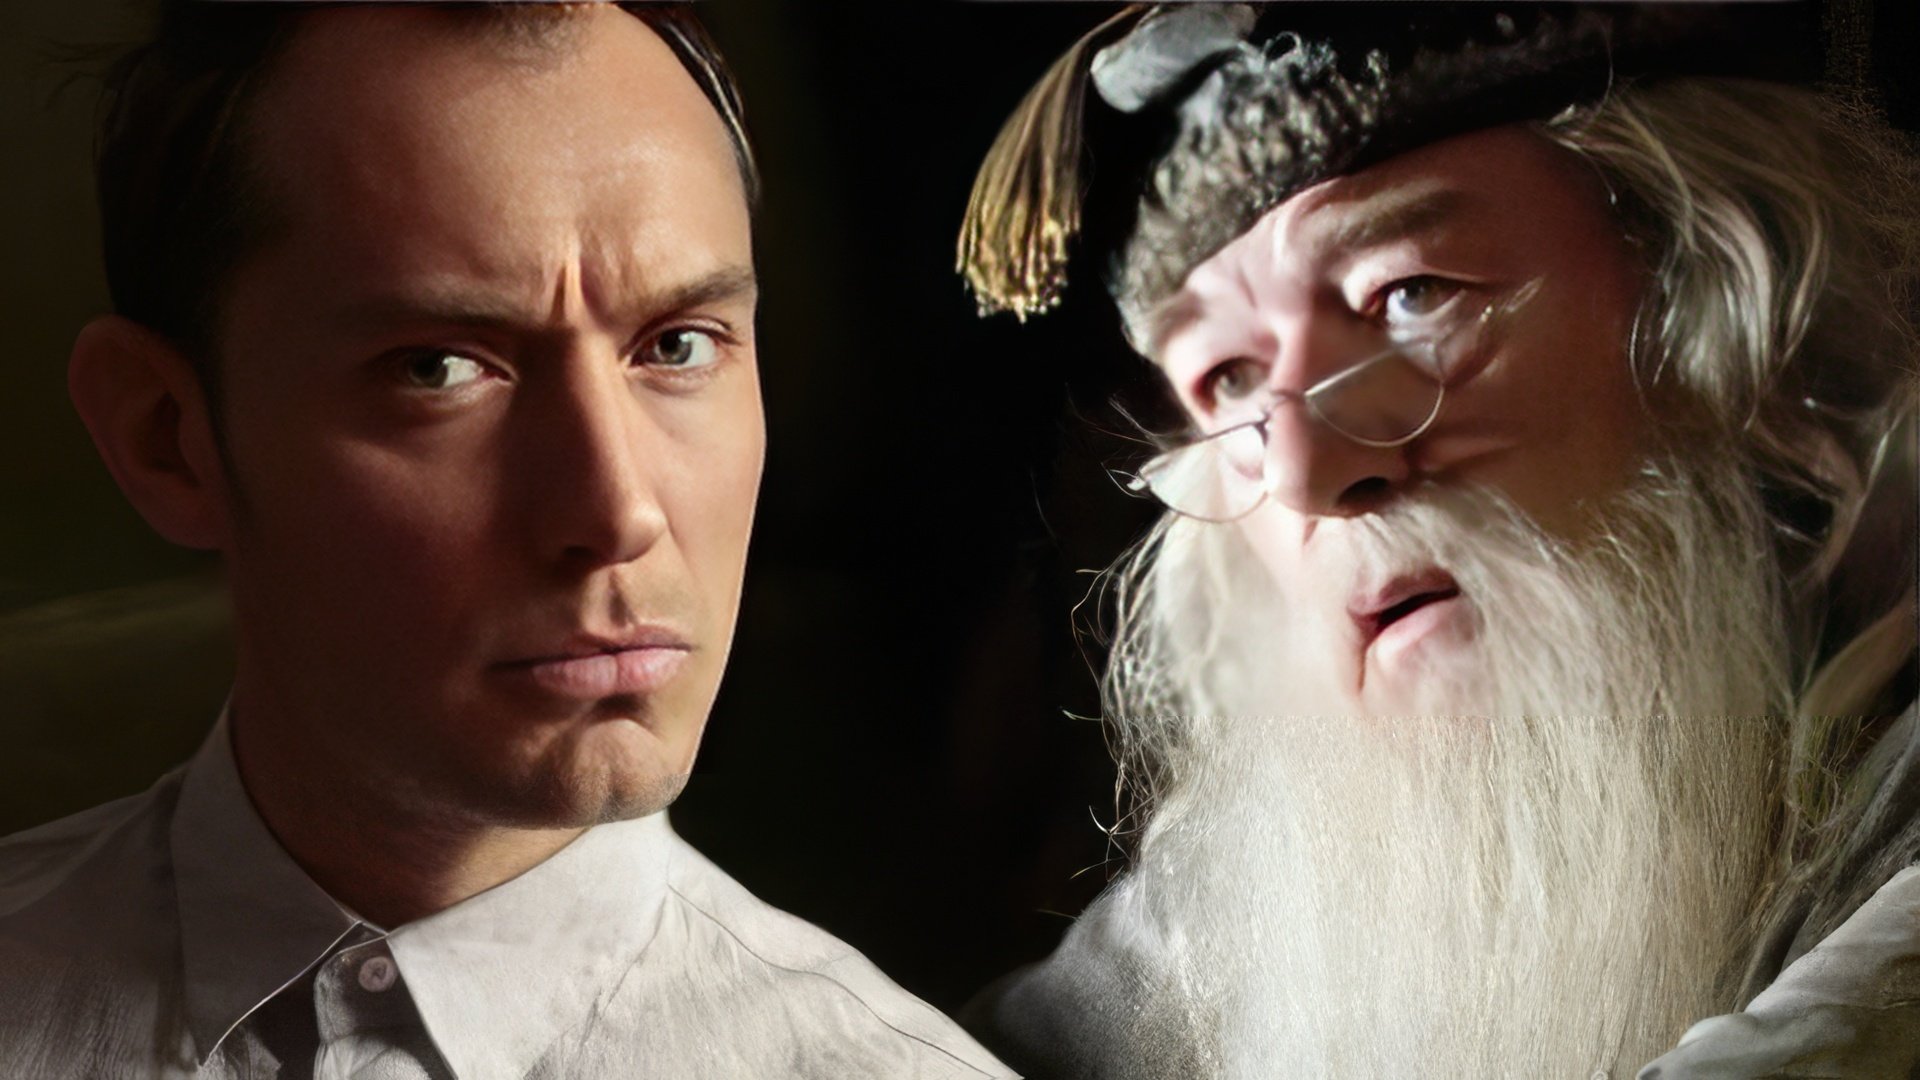 Jude Law portrayed the young Dumbledore